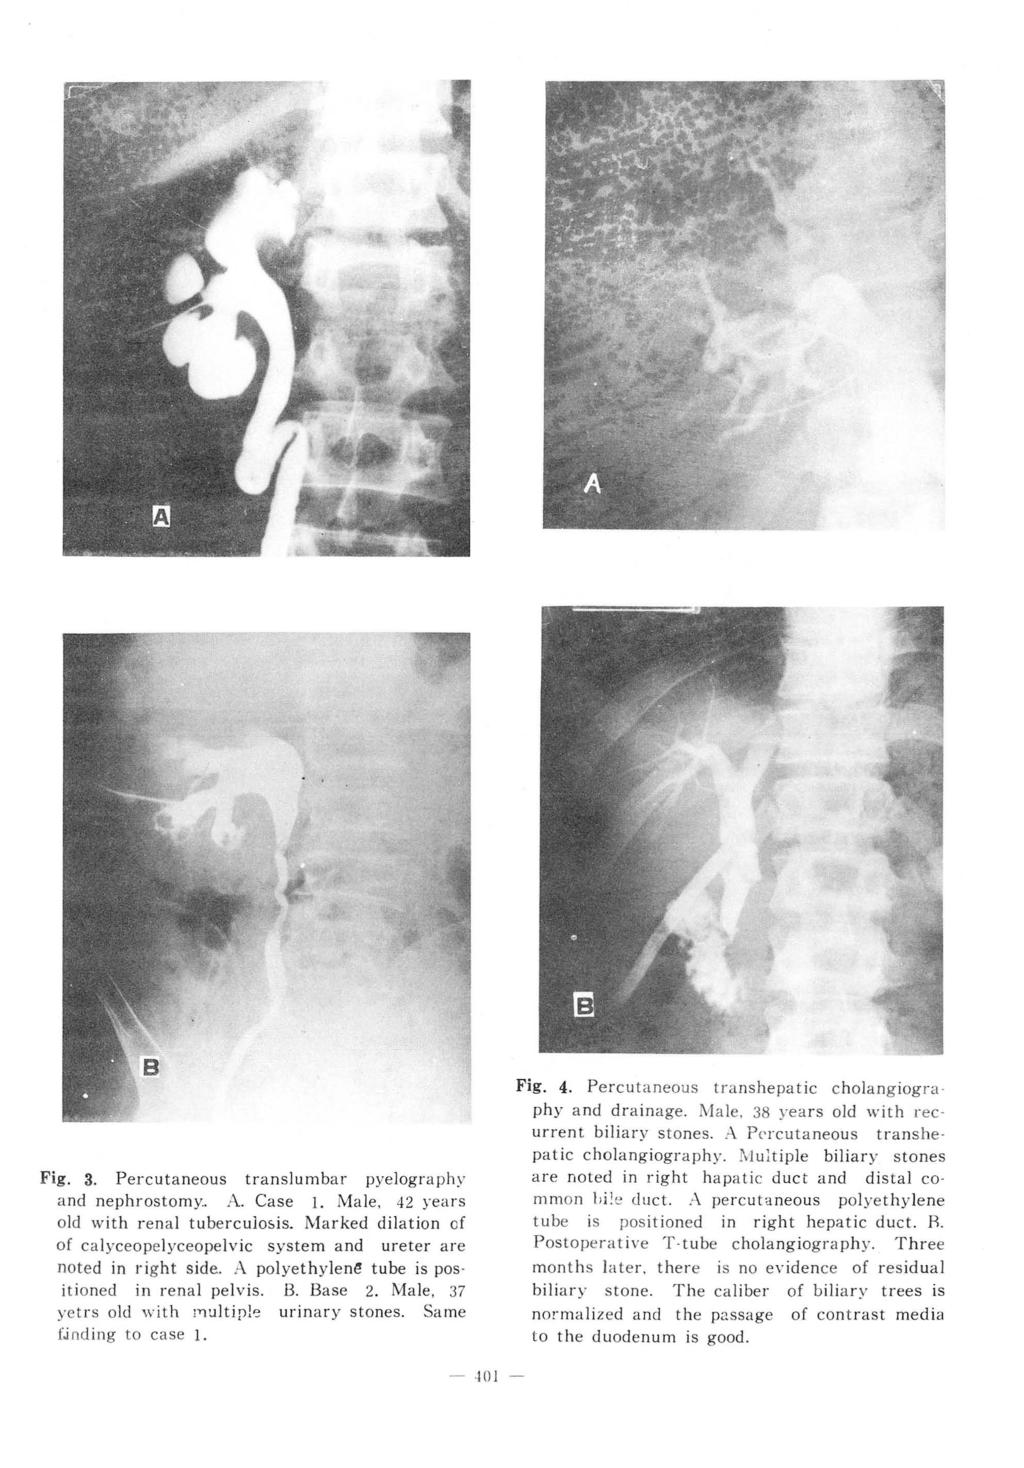 Fig. 3. Percutaneous translumbar pyelography and nephrostomy.. A. Case 1. Male. 42 yea rs old with renal tubercuìosis.